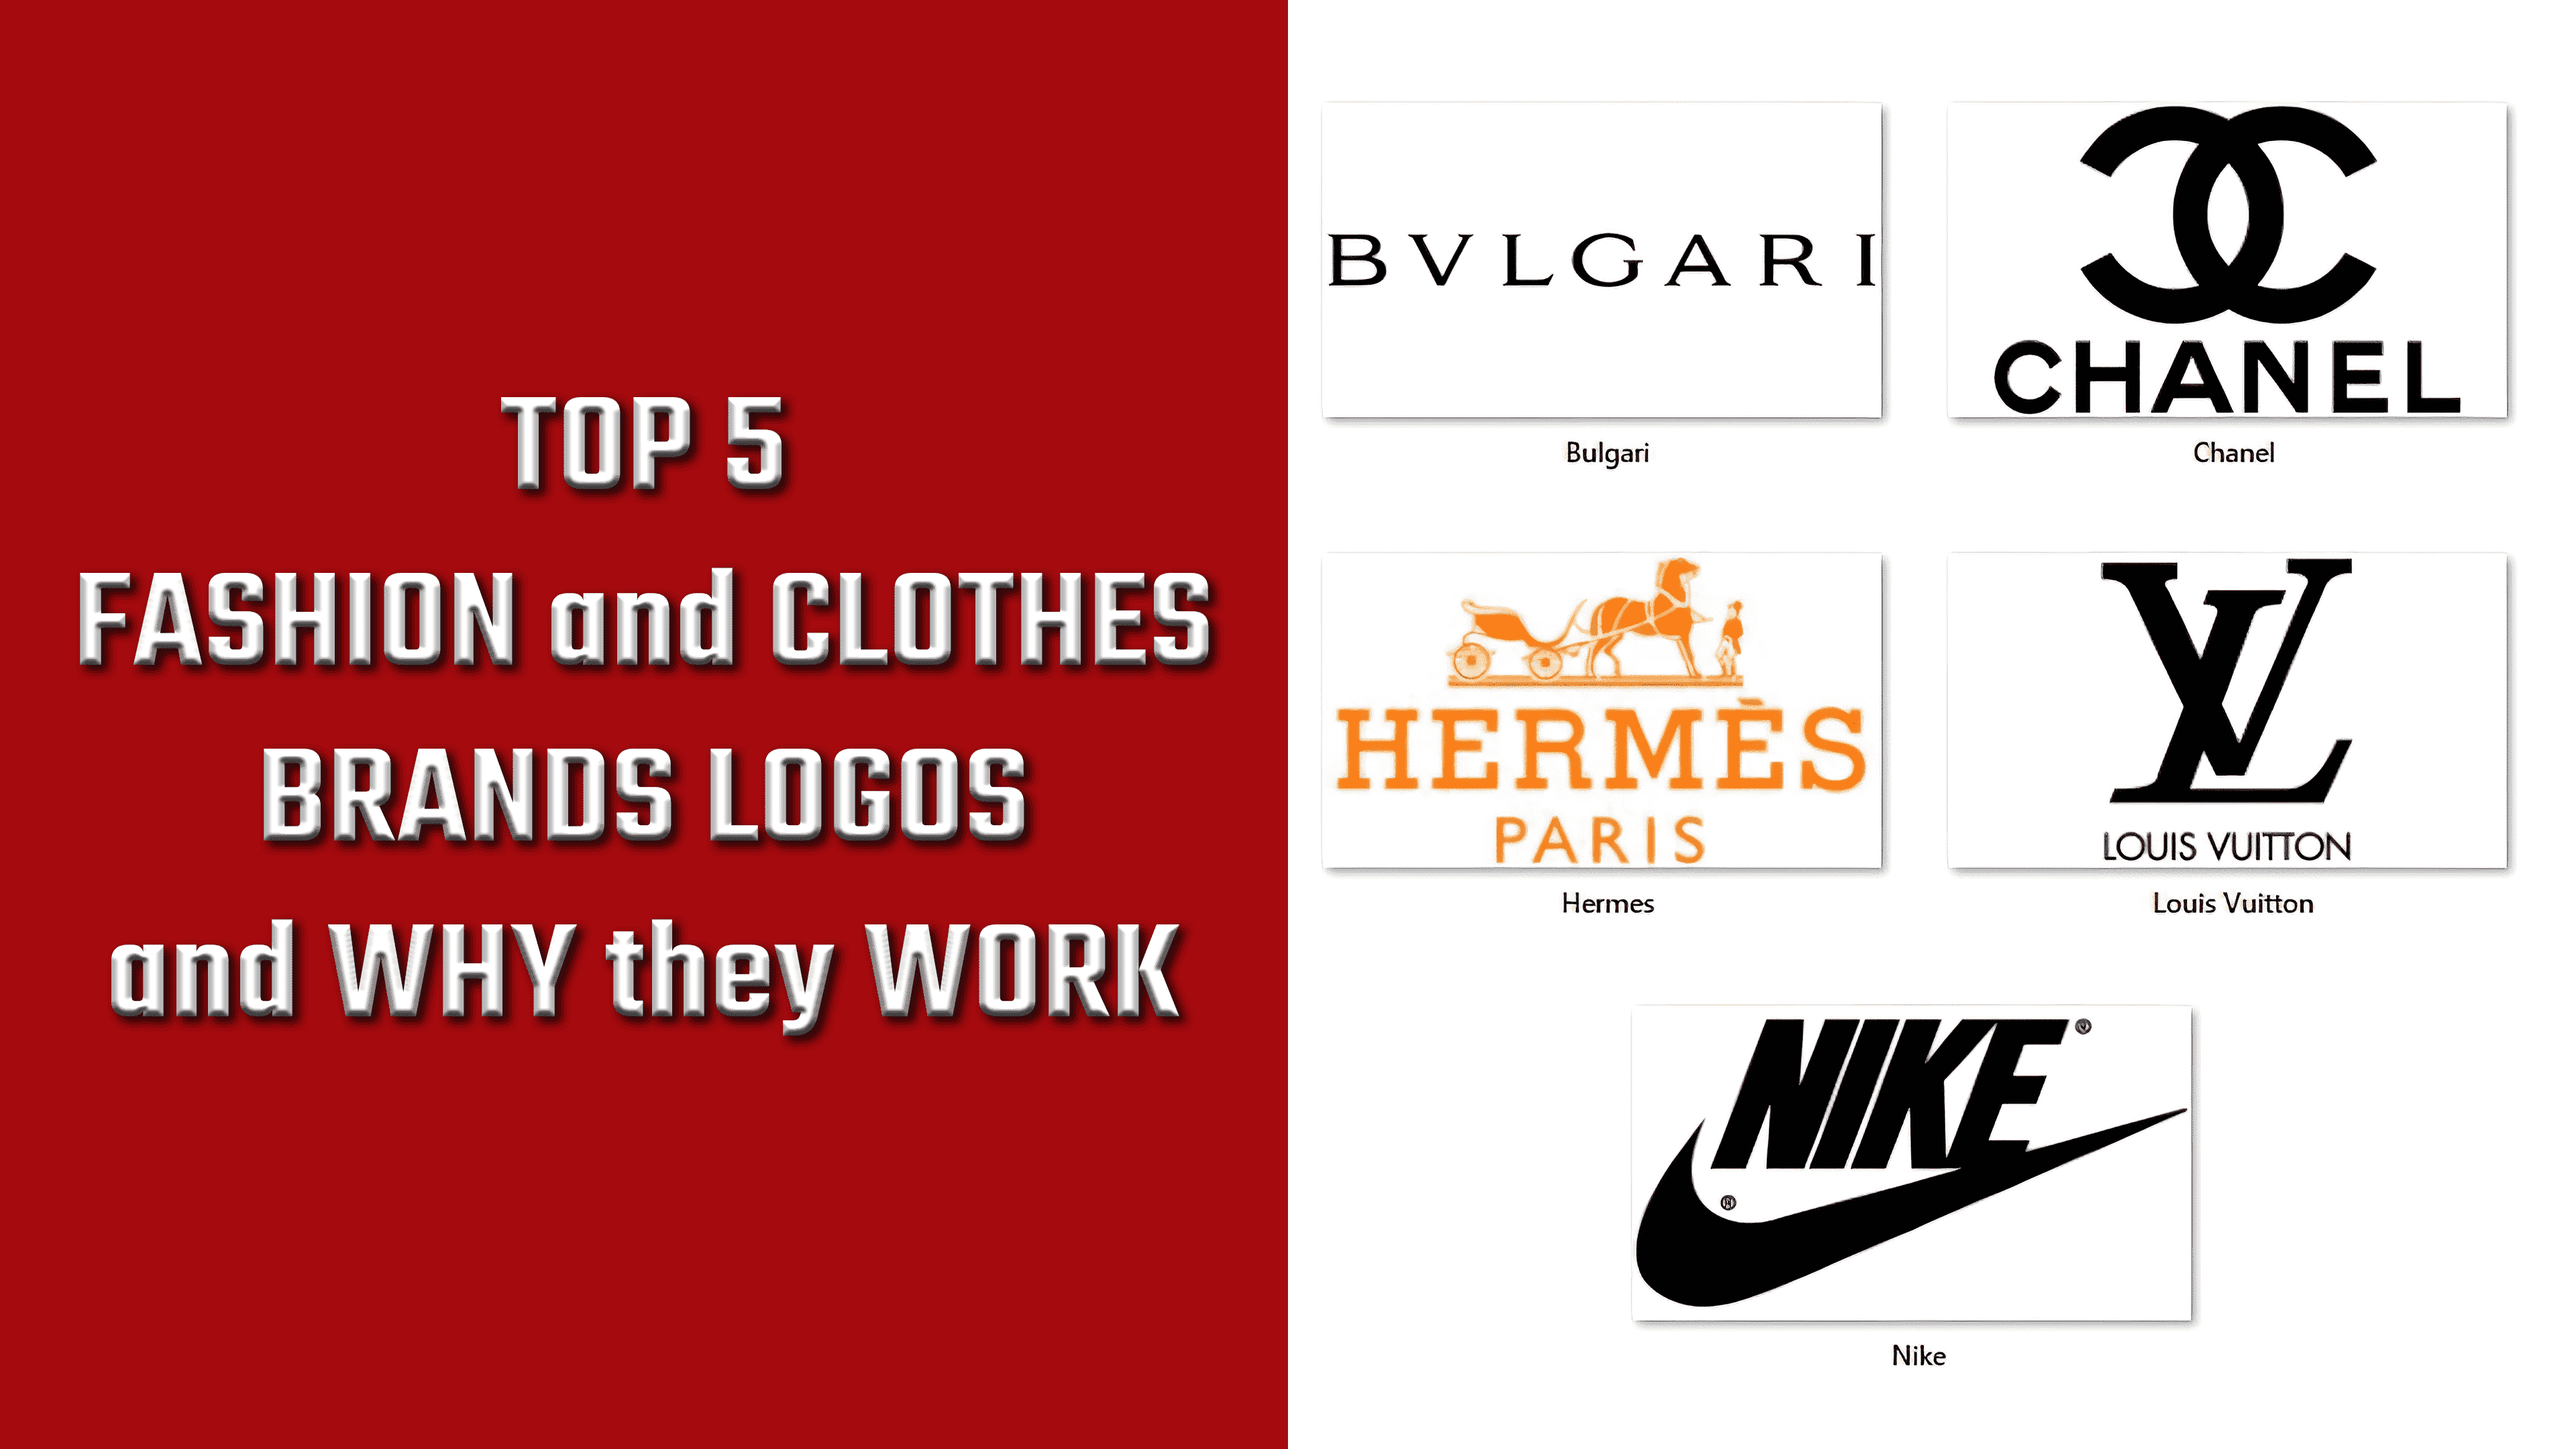 Top 5 Fashion and Clothes Brands Logos and Why they Work